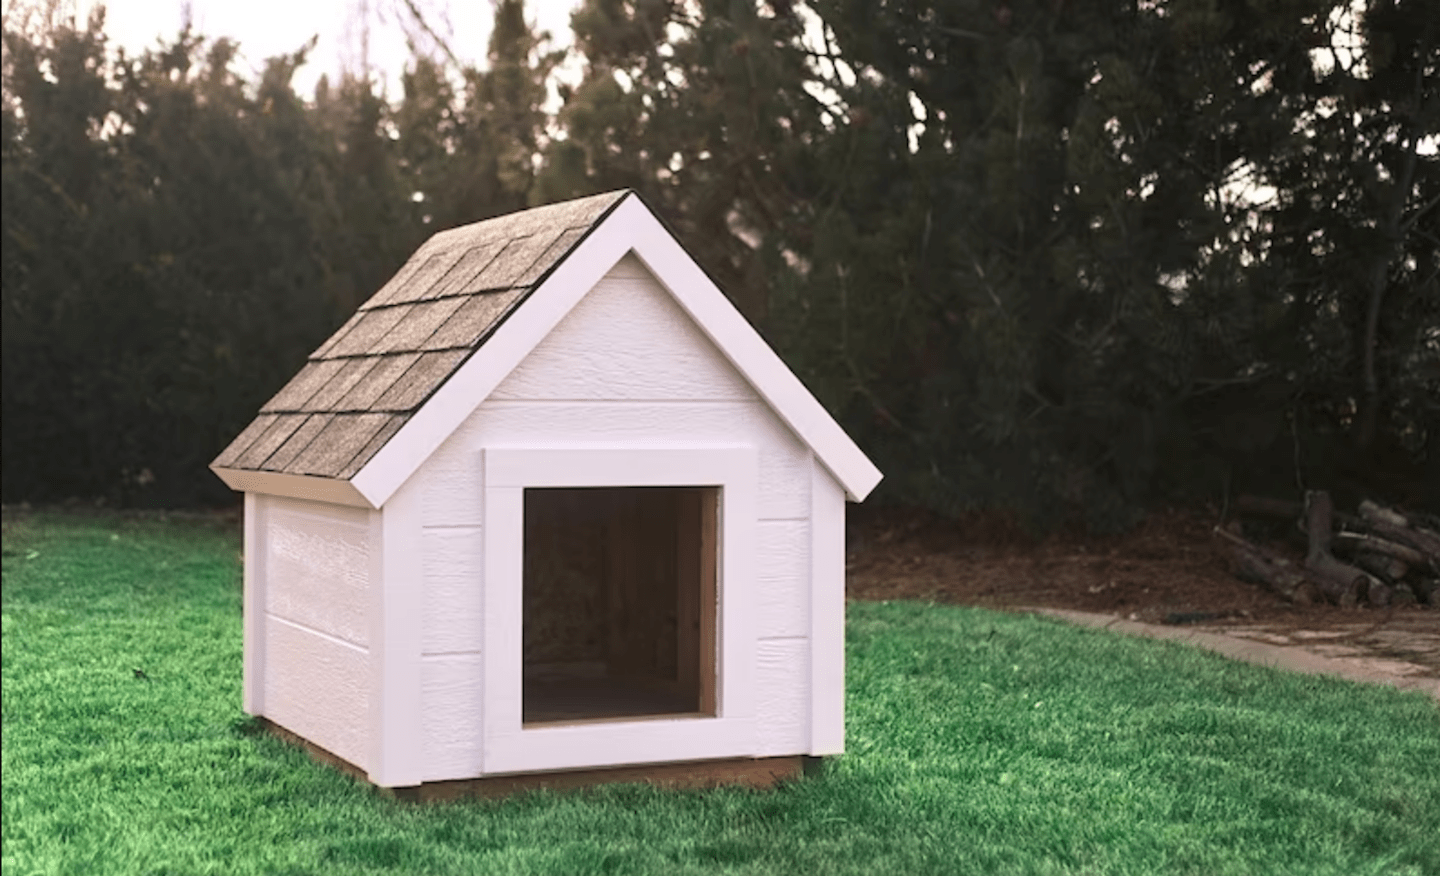 classic dog house with triangular roof made with white wood in backyard with green grass